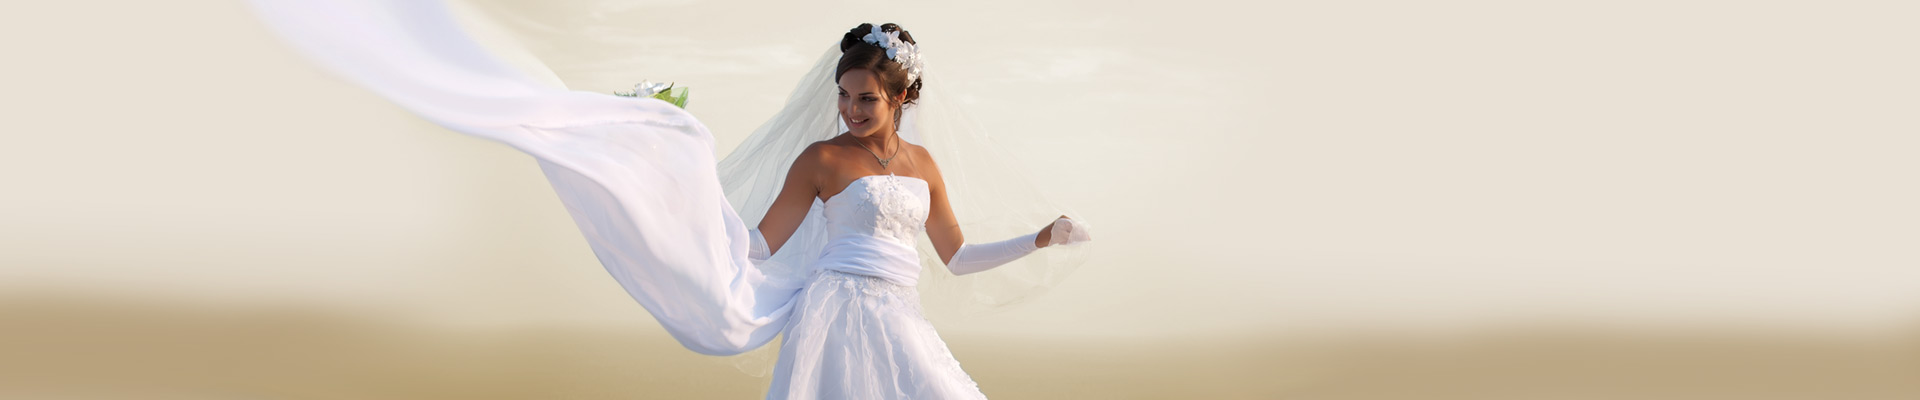 All Helpful Services for Bride - Magdalena Alterations & Fittings